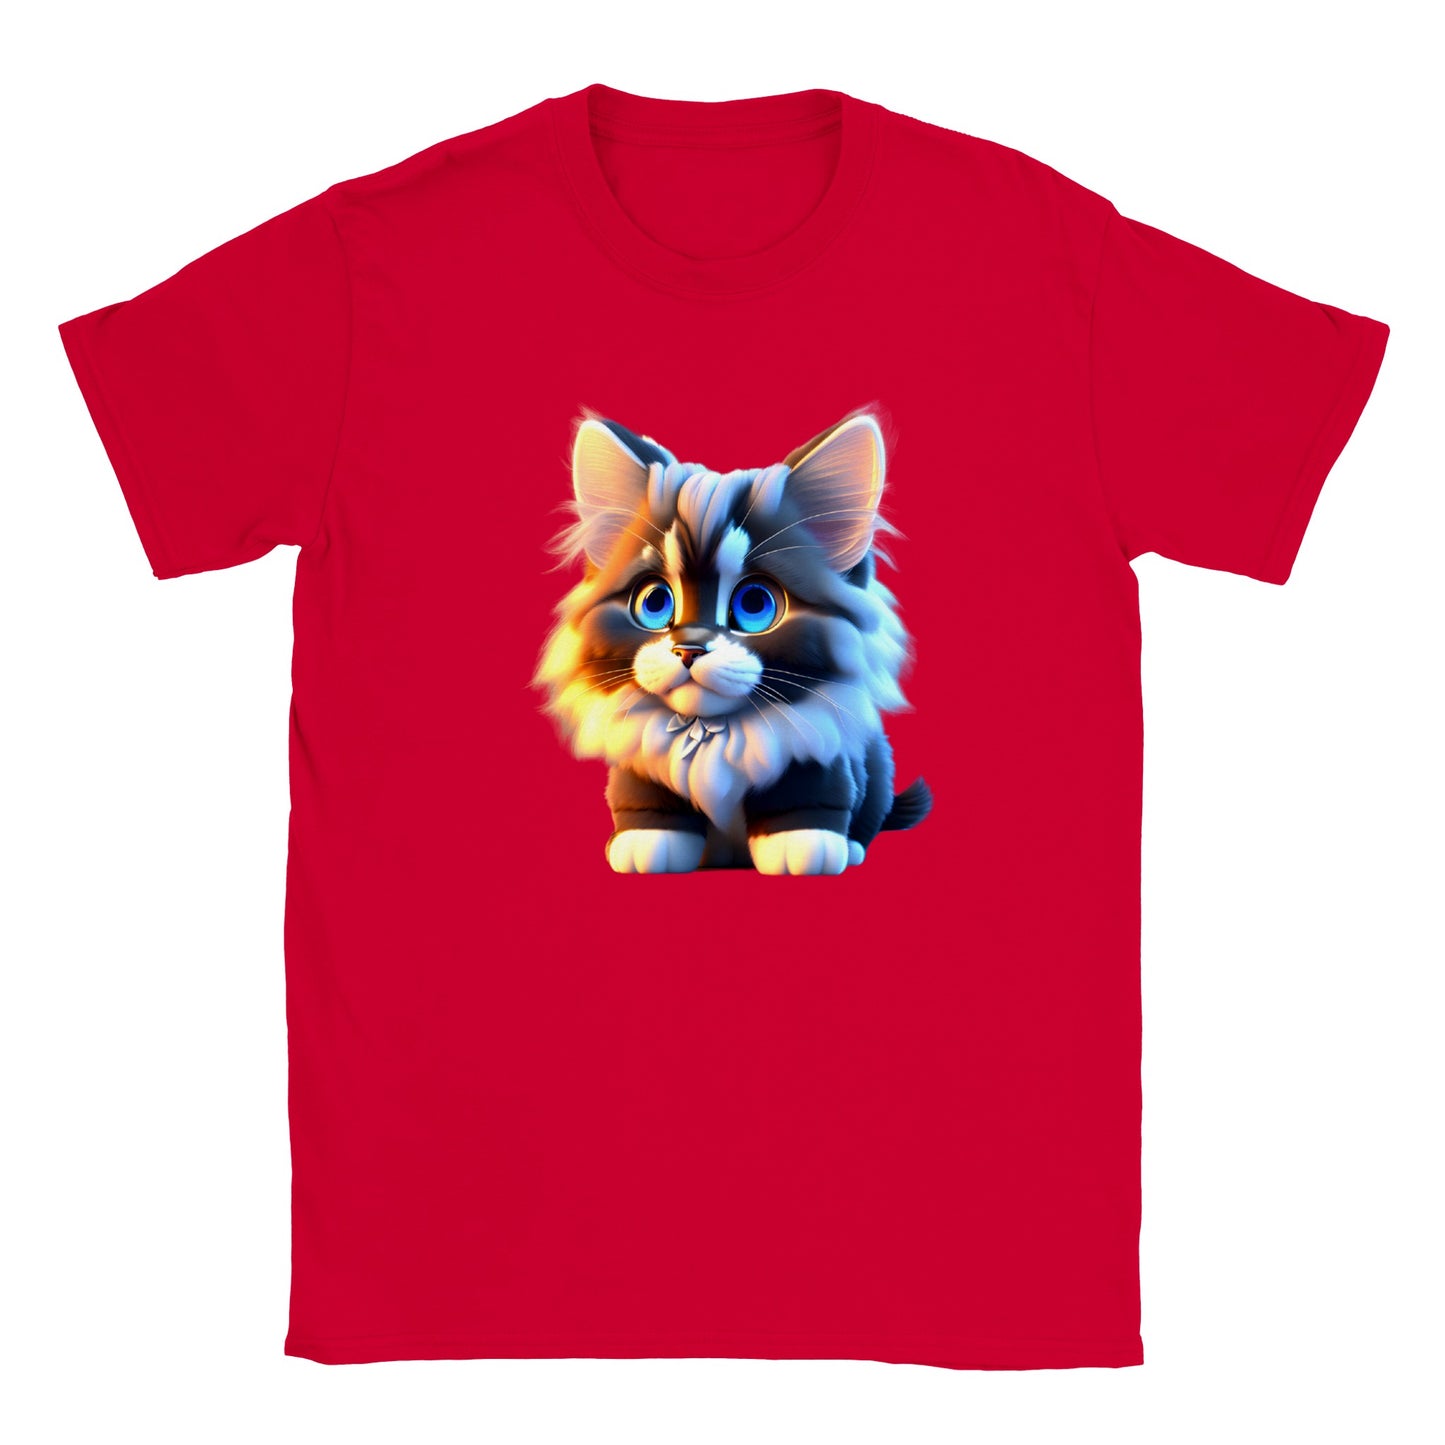 Adorable, Cool, Cute Cats and Kittens Toy - Classic Kids Crewneck T-Shirt 8